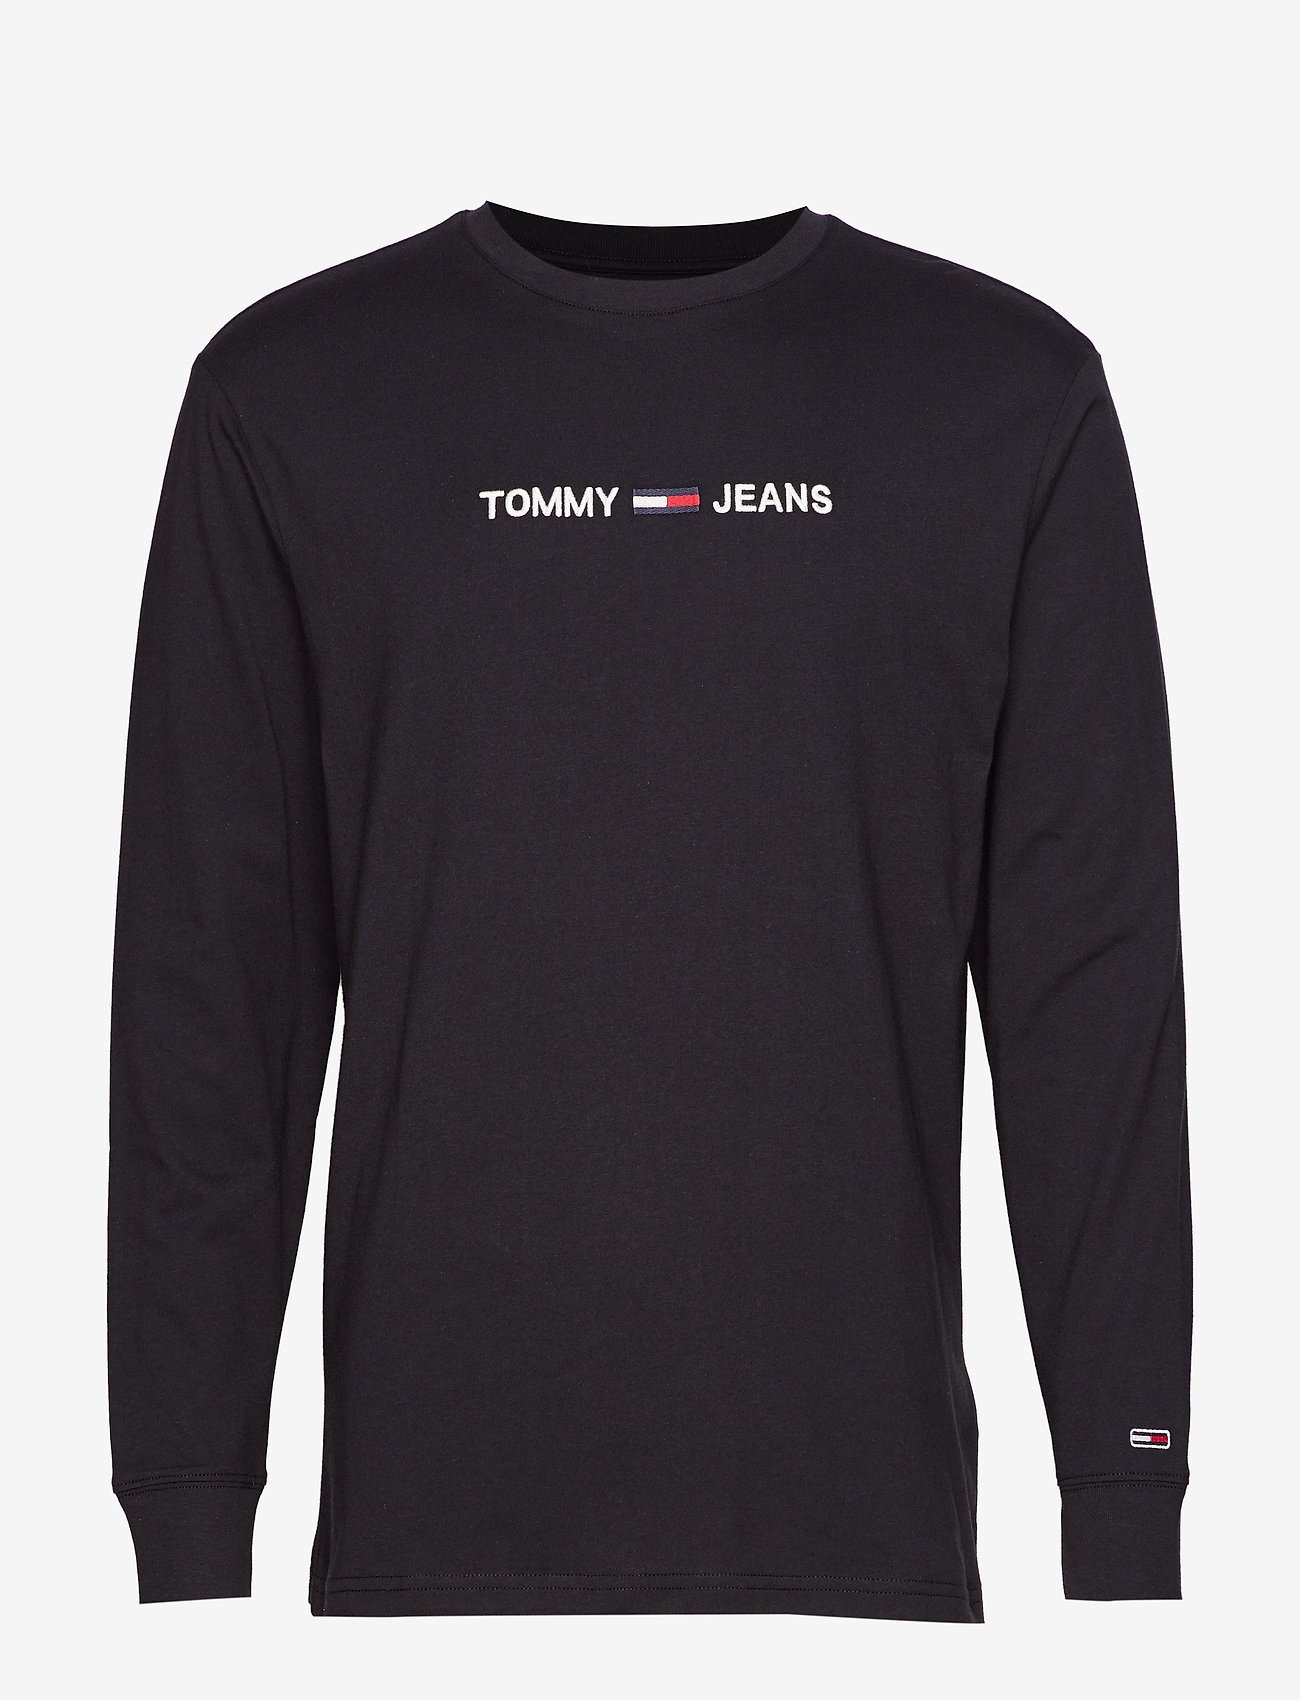 tommy jeans small text tee